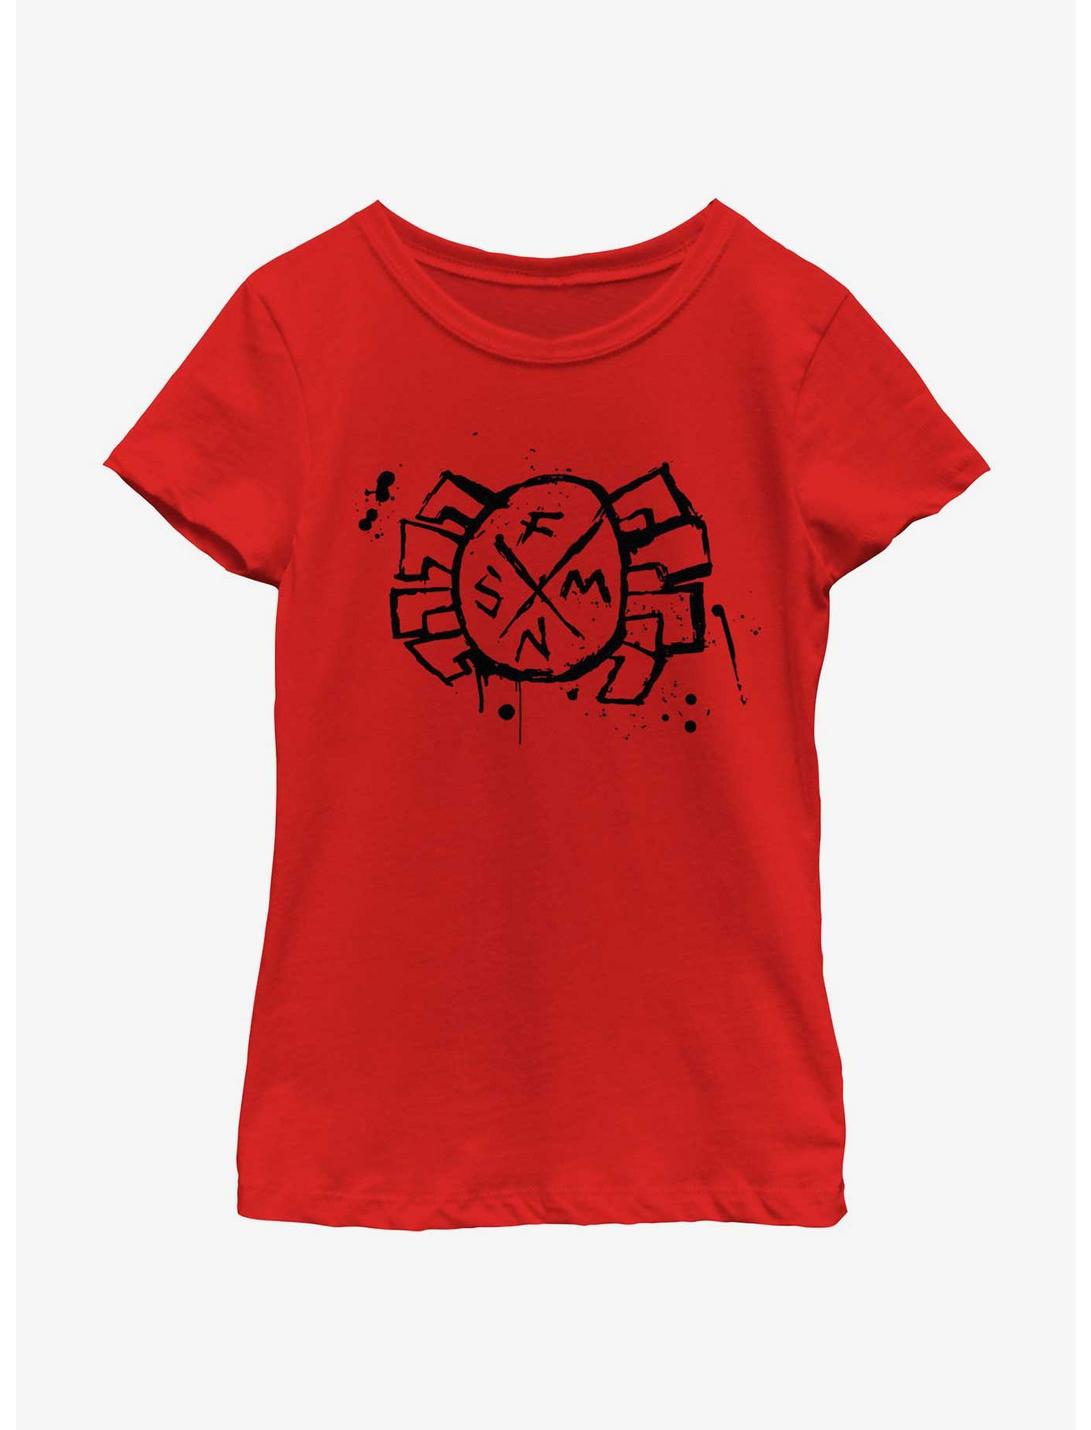 Marvel Spider-Man: Across The Spiderverse Spider-Punk Logo Youth Girls T-Shirt, RED, hi-res